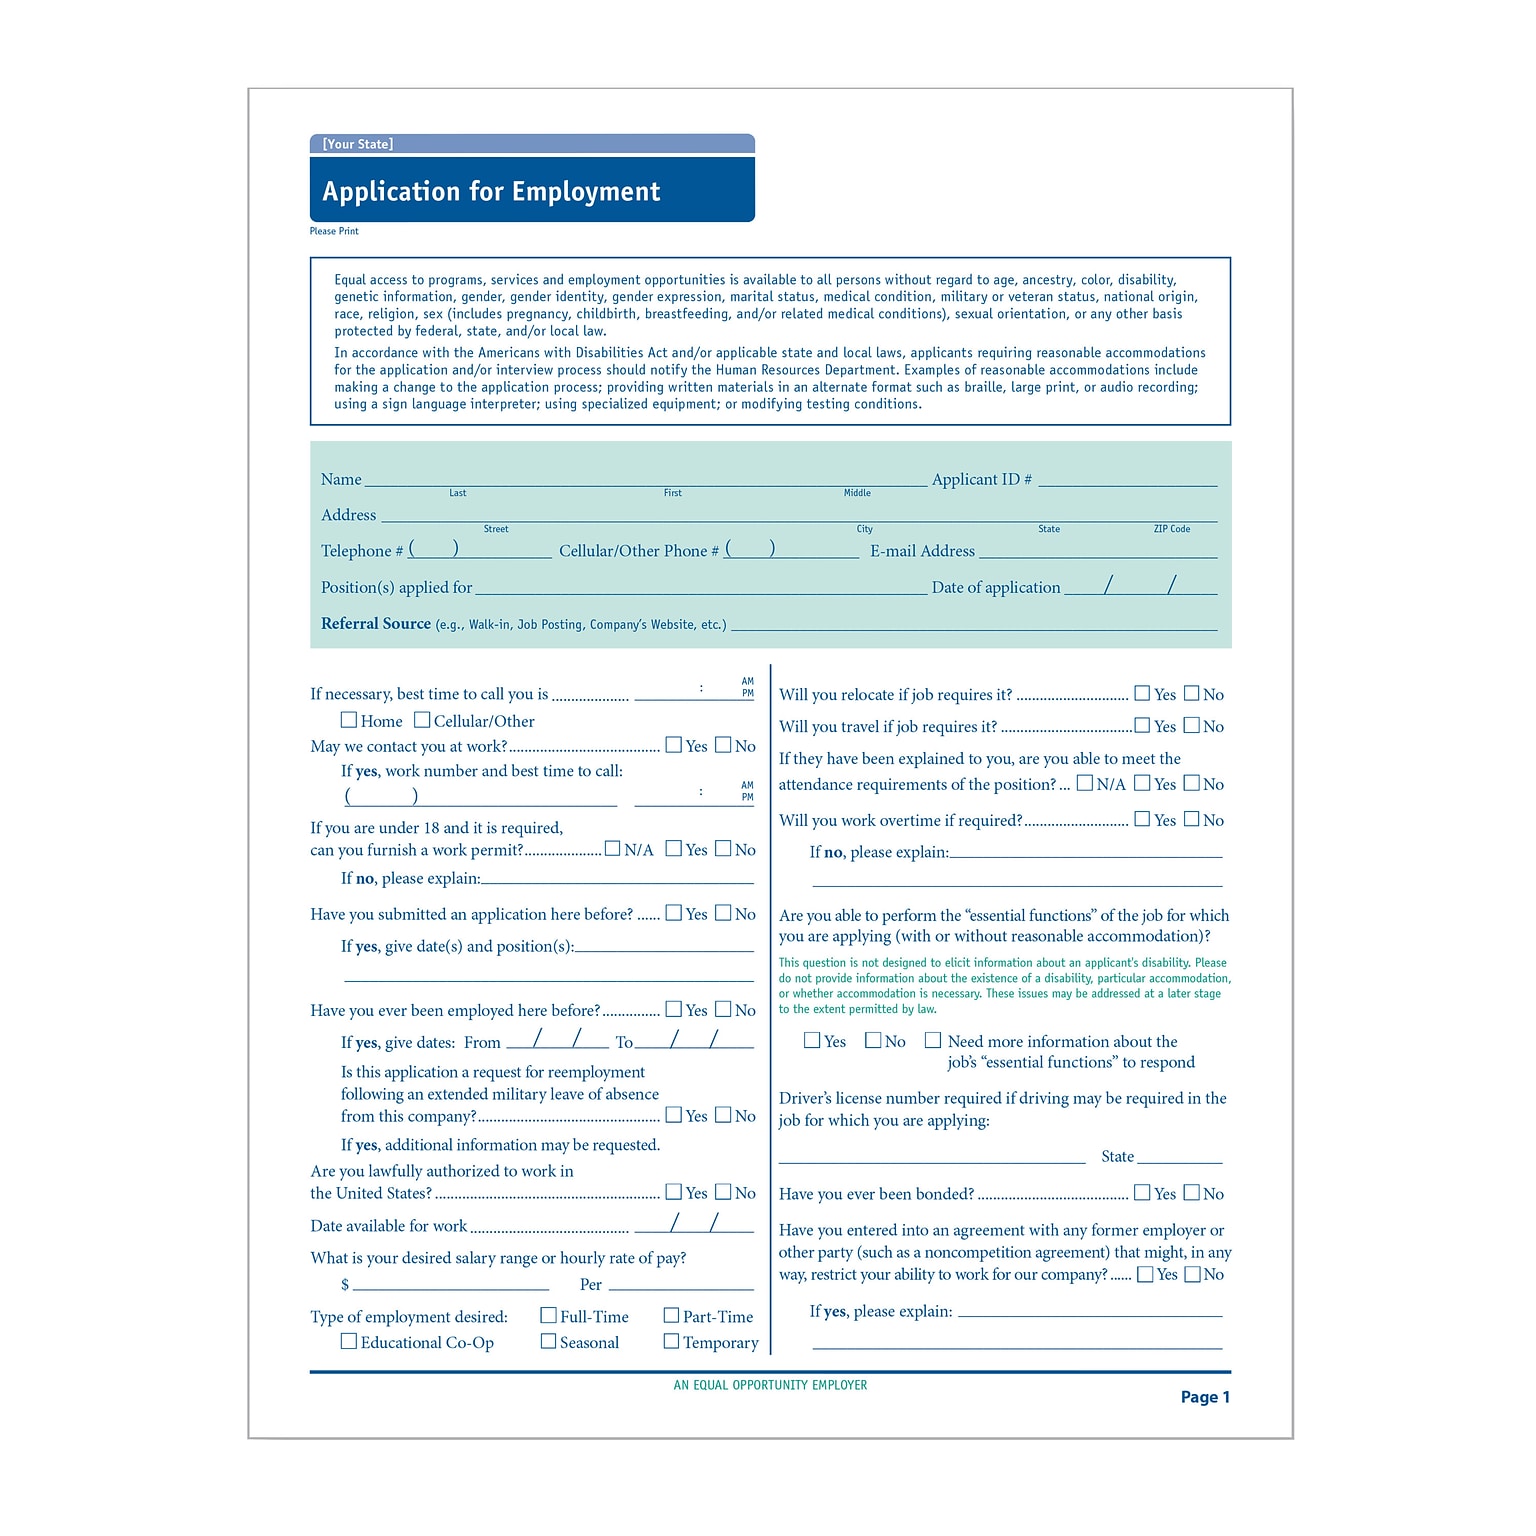 ComplyRight™ South Dakota Job Application, Pack of 50 (A2179SD)